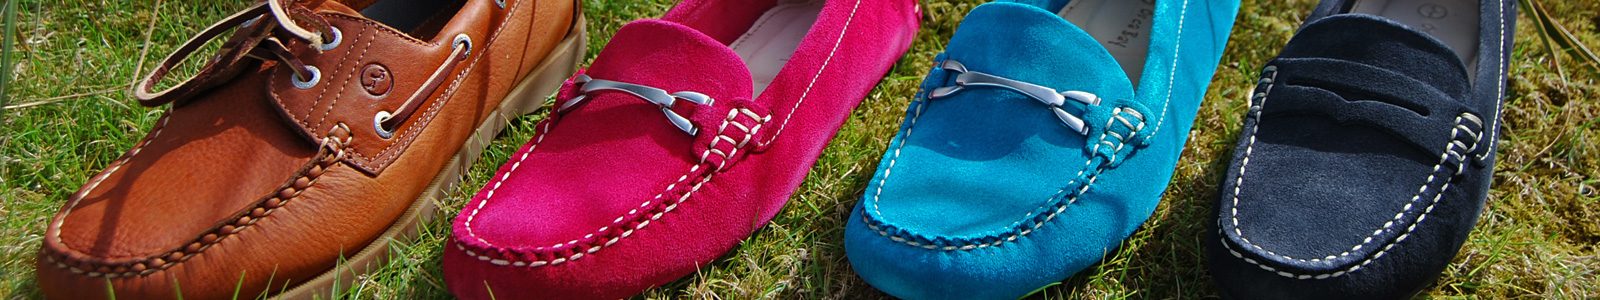 Womens Loafers | Leather and Suede Styles In Multiple Colours | ArdMoor